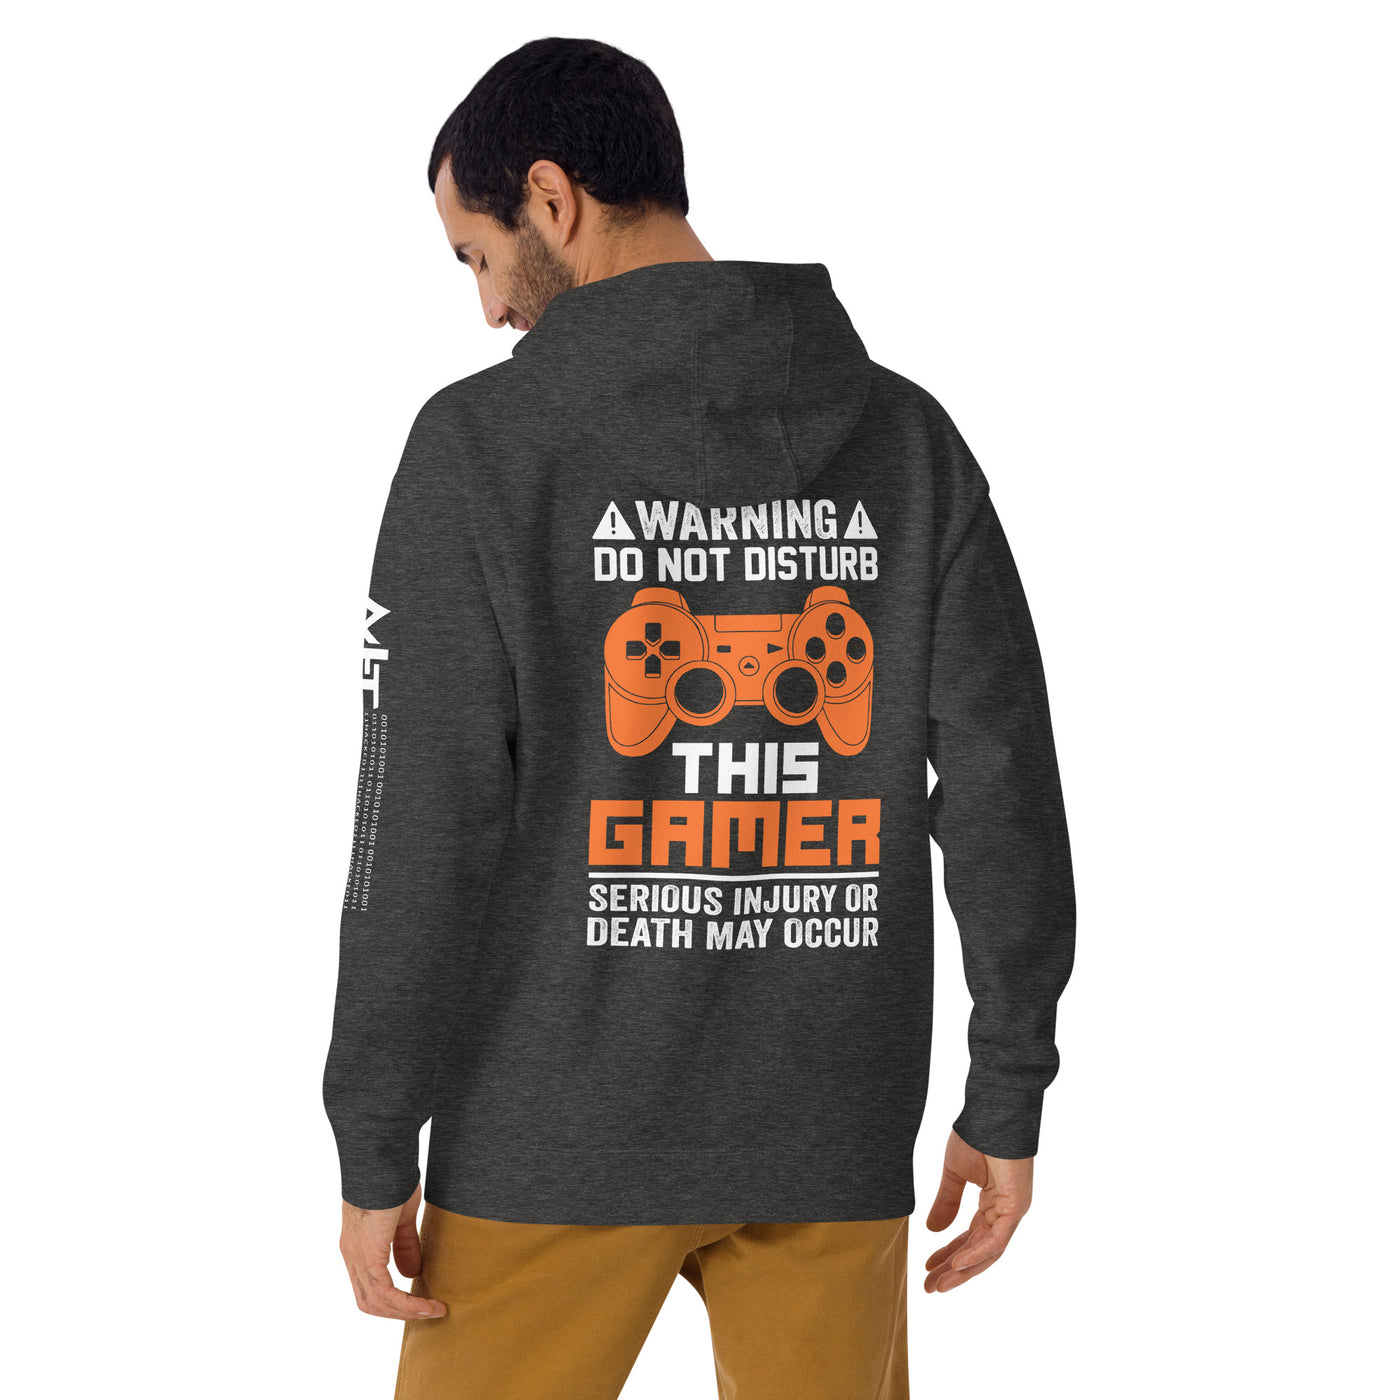 Warning: Do Not Disturb this Gamer! Serious Injury or Death may Occur - Unisex Hoodie ( Back Print )